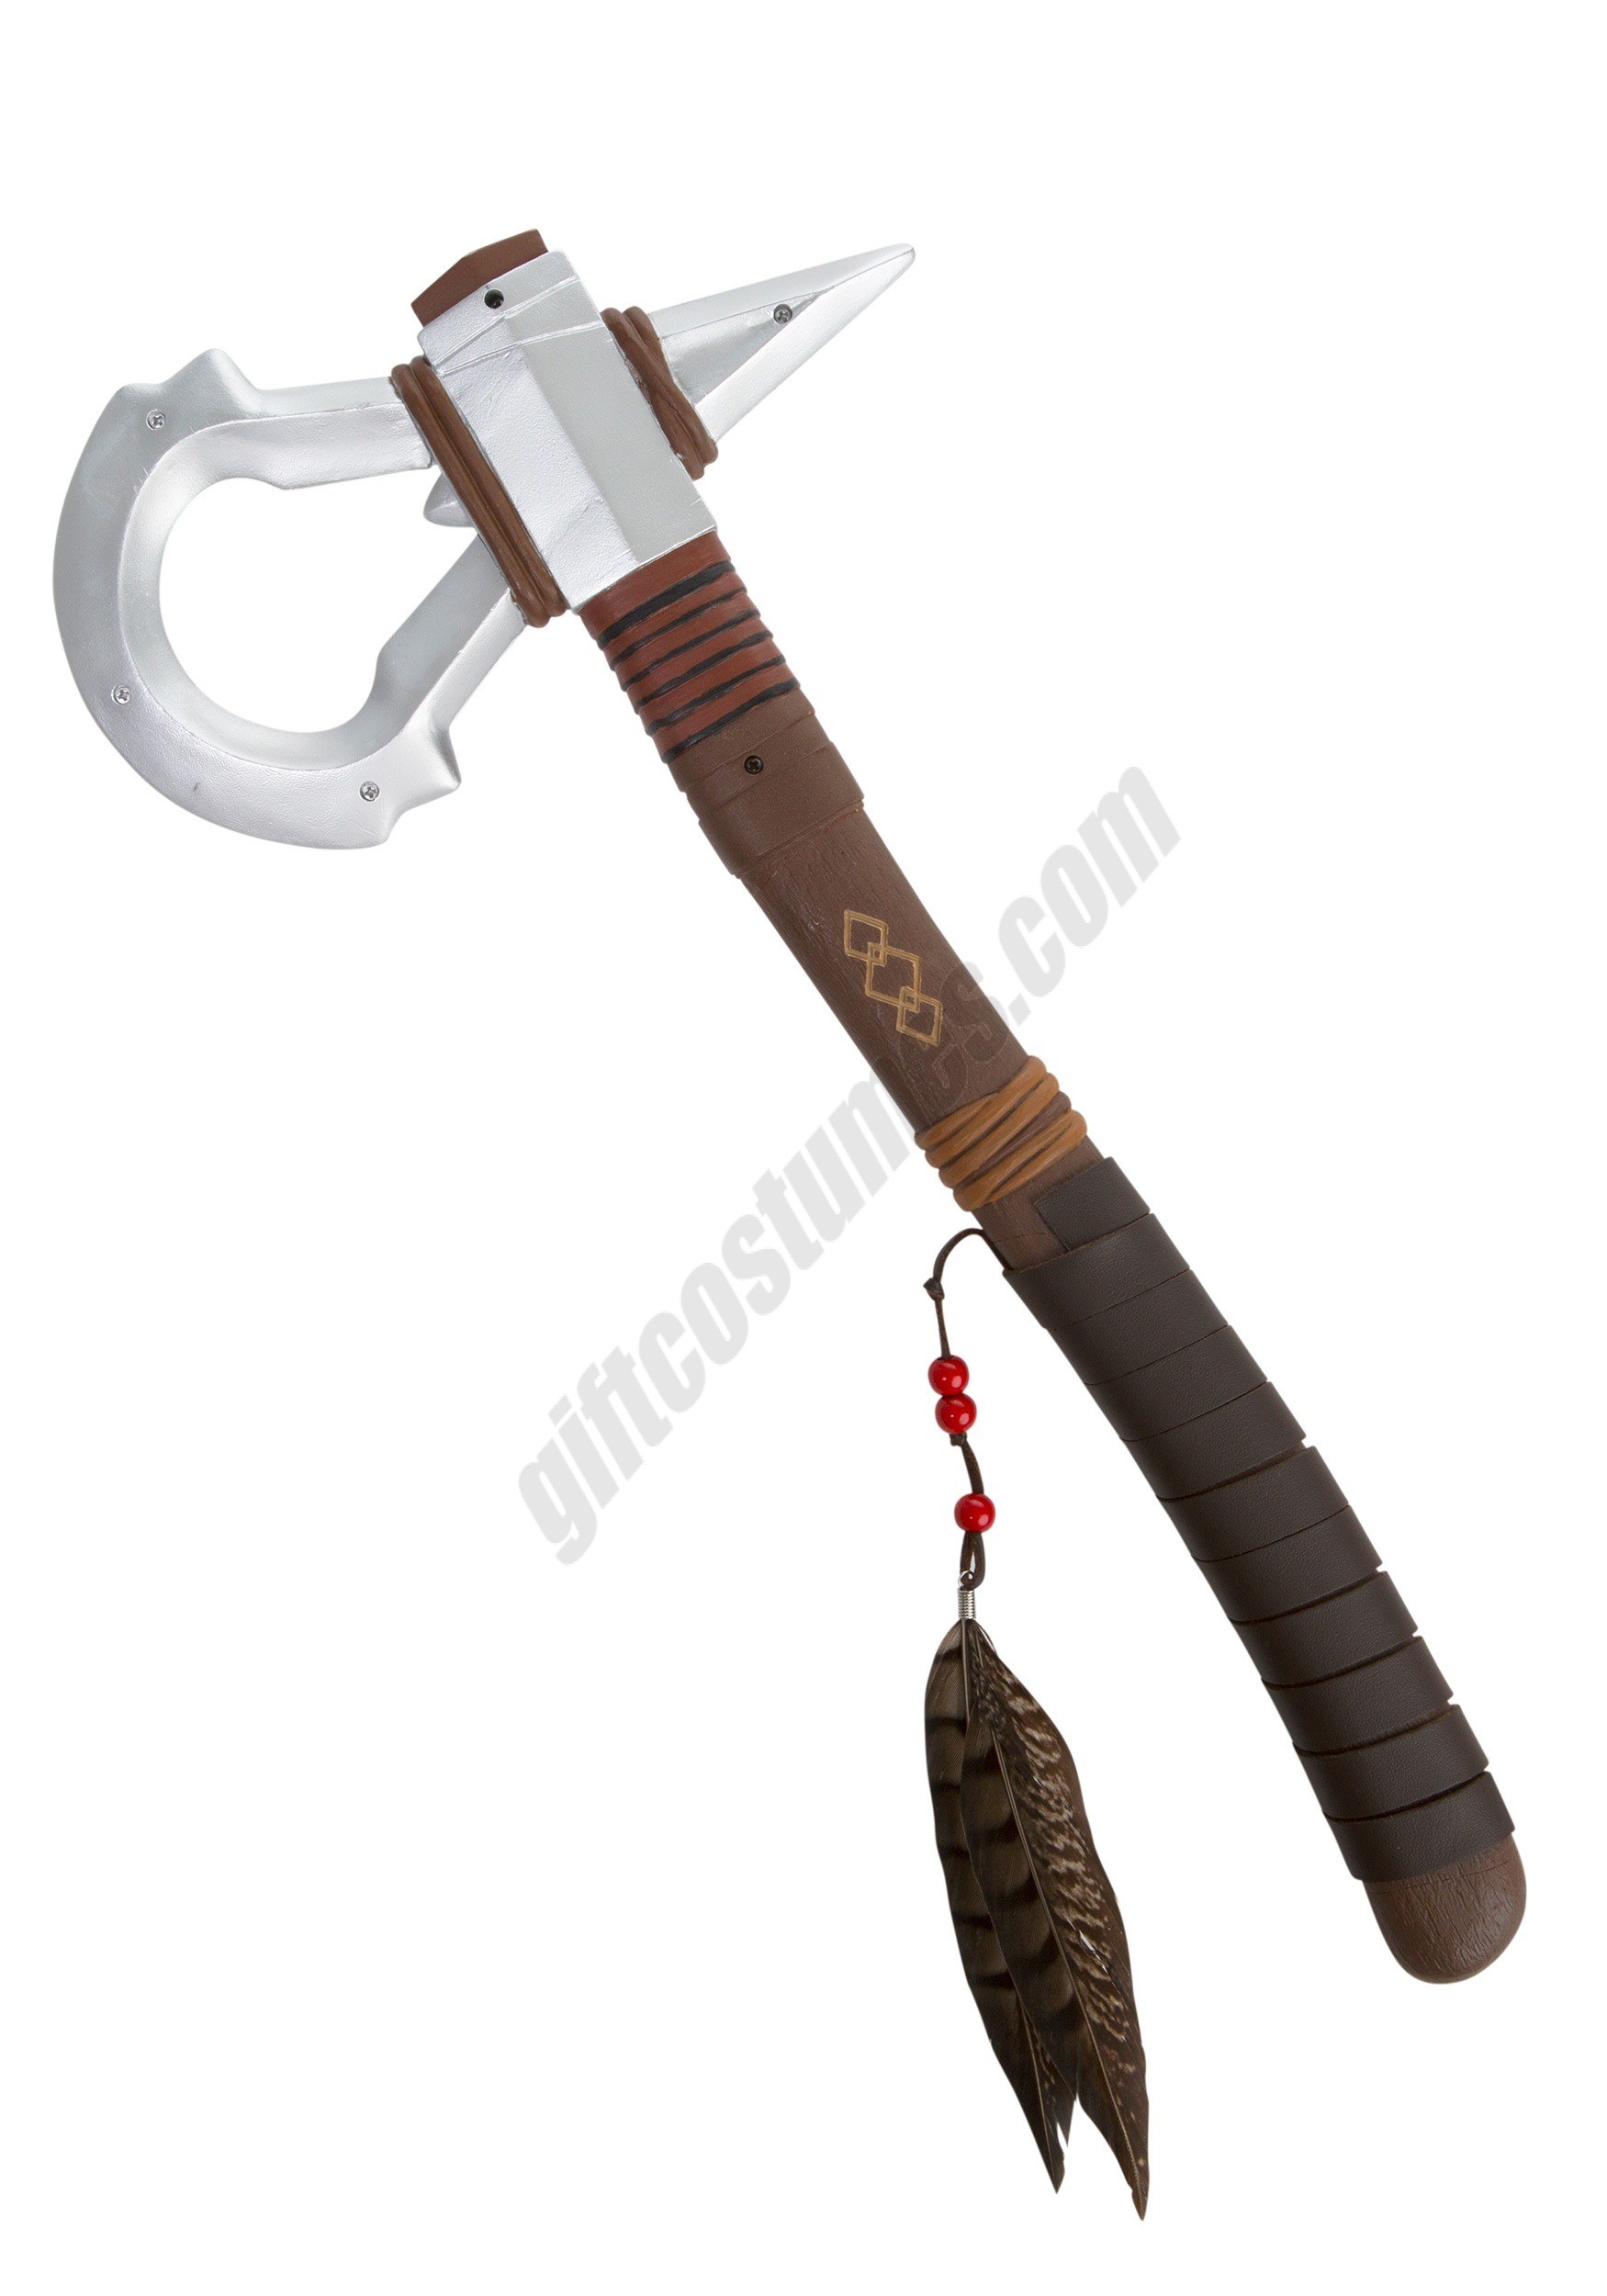 Assassins Creed: Connor Tomahawk Promotions - Assassins Creed: Connor Tomahawk Promotions